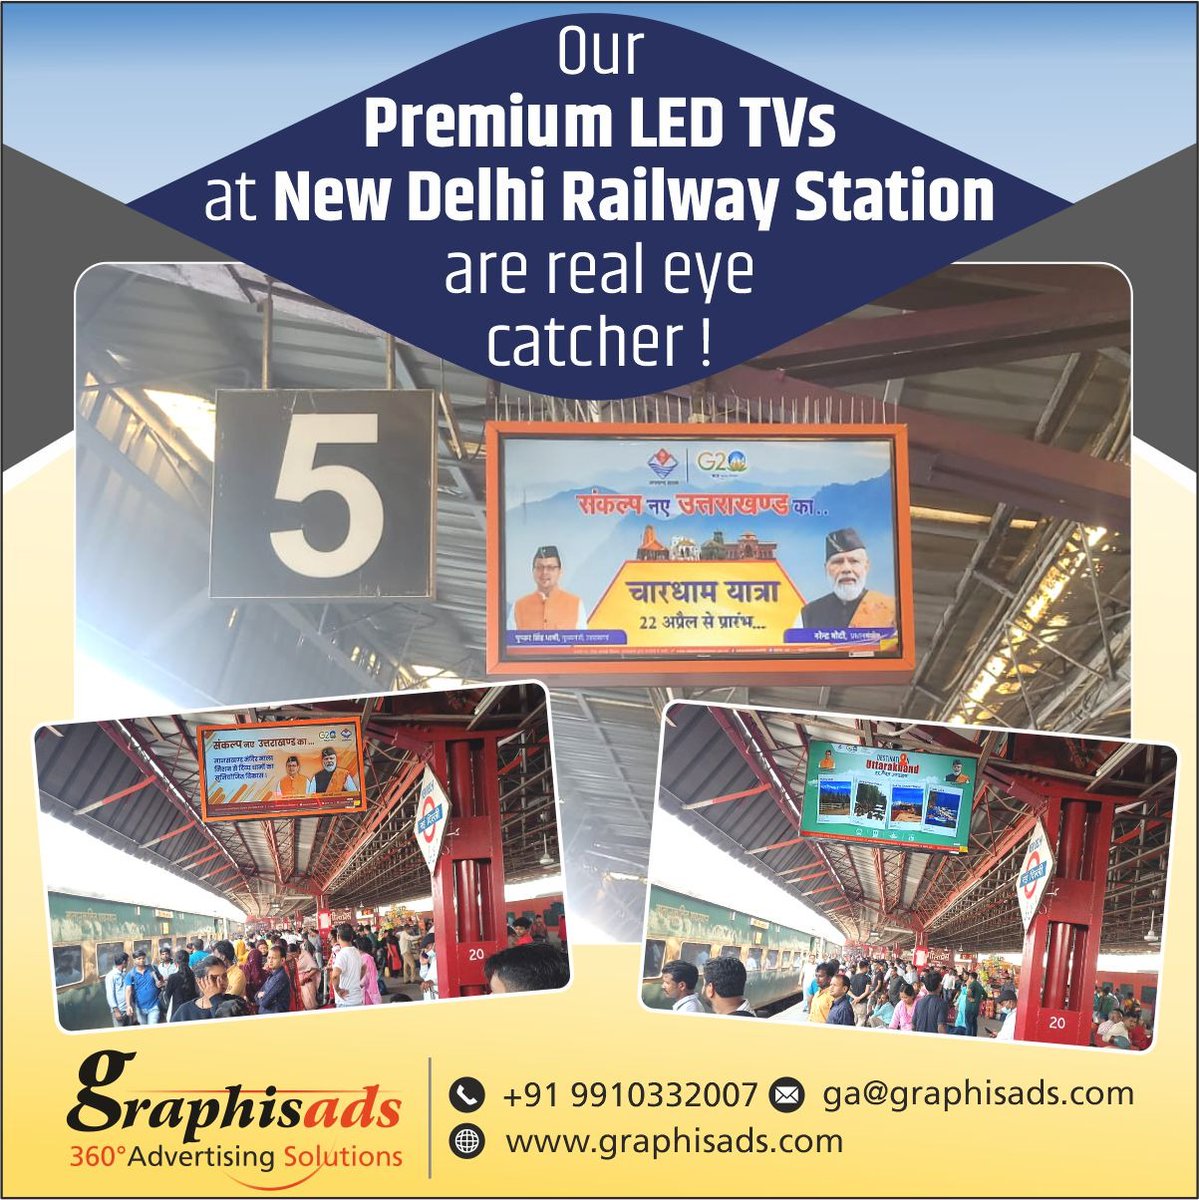 LED TVs installed at strategic points at all platforms of 
New Delhi Railway Station gives best mileage to Brands at economical cost. 

#NewDelhiRailwayStation#UKGovt#Uttrakhandgovernment#advertising#outdooradvertising#OOHMedia#trainadvertising#Digitalpromotion#Graphisads